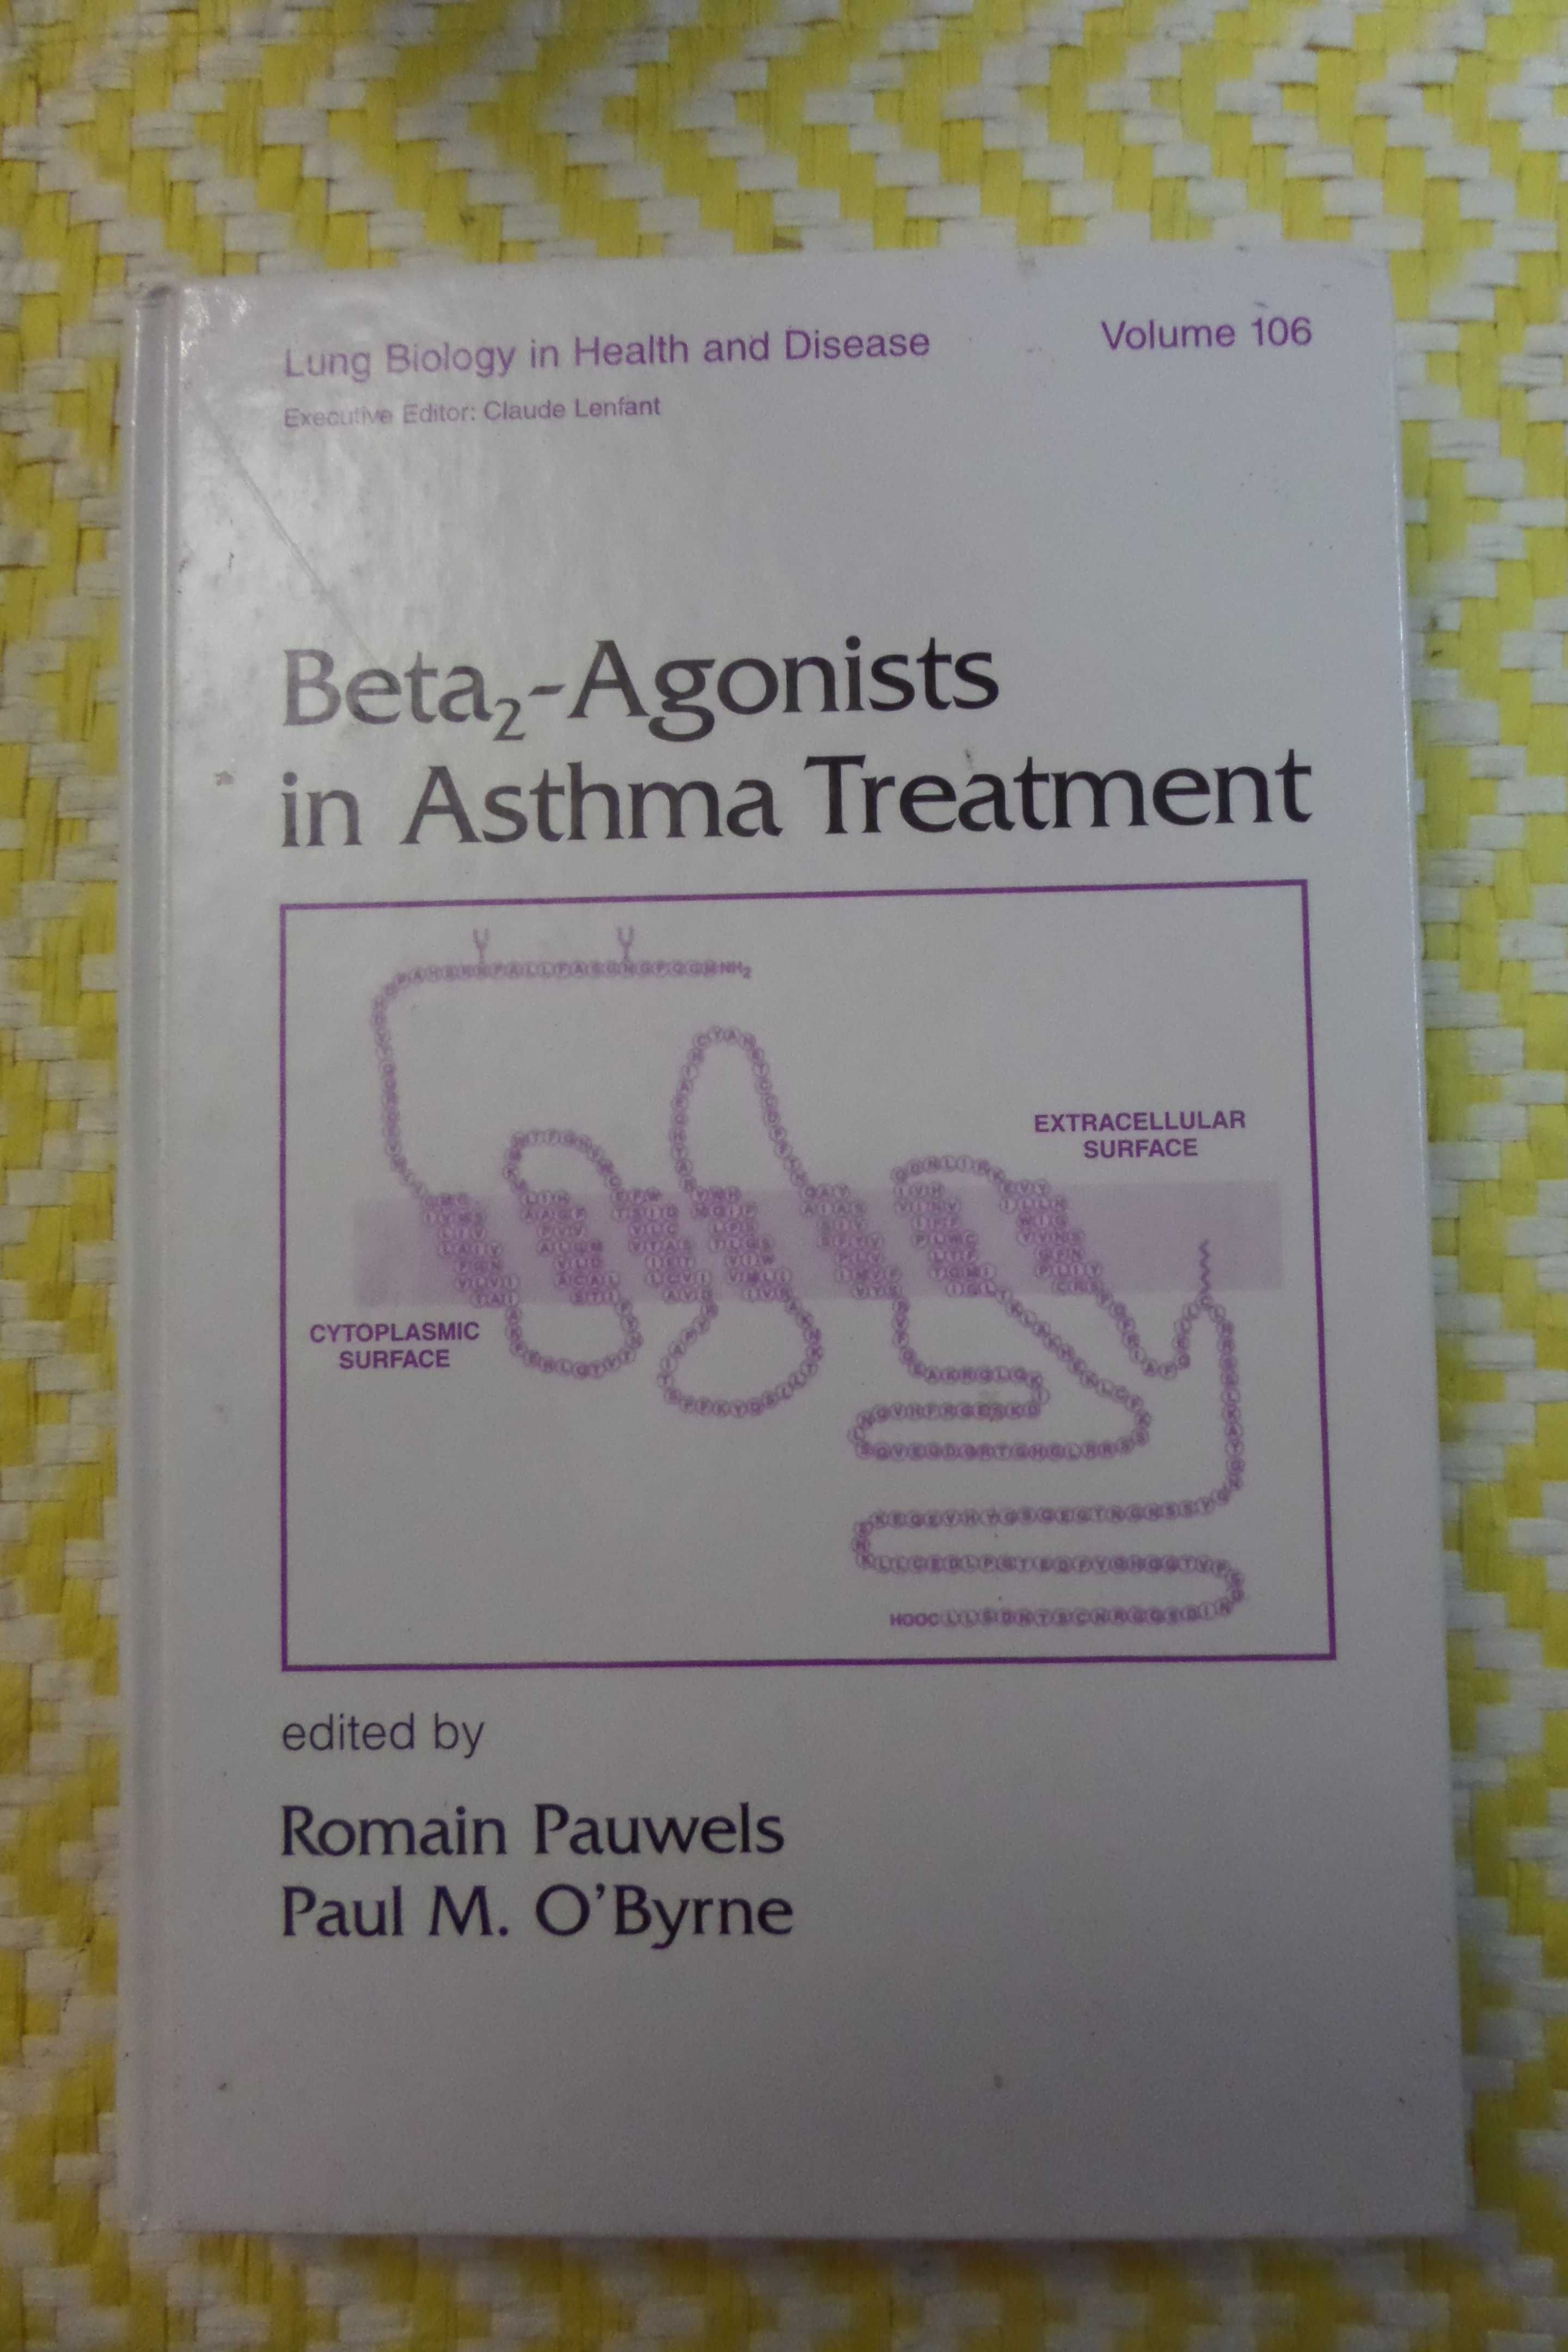 Beta 2-agonists in Asthma Treatment